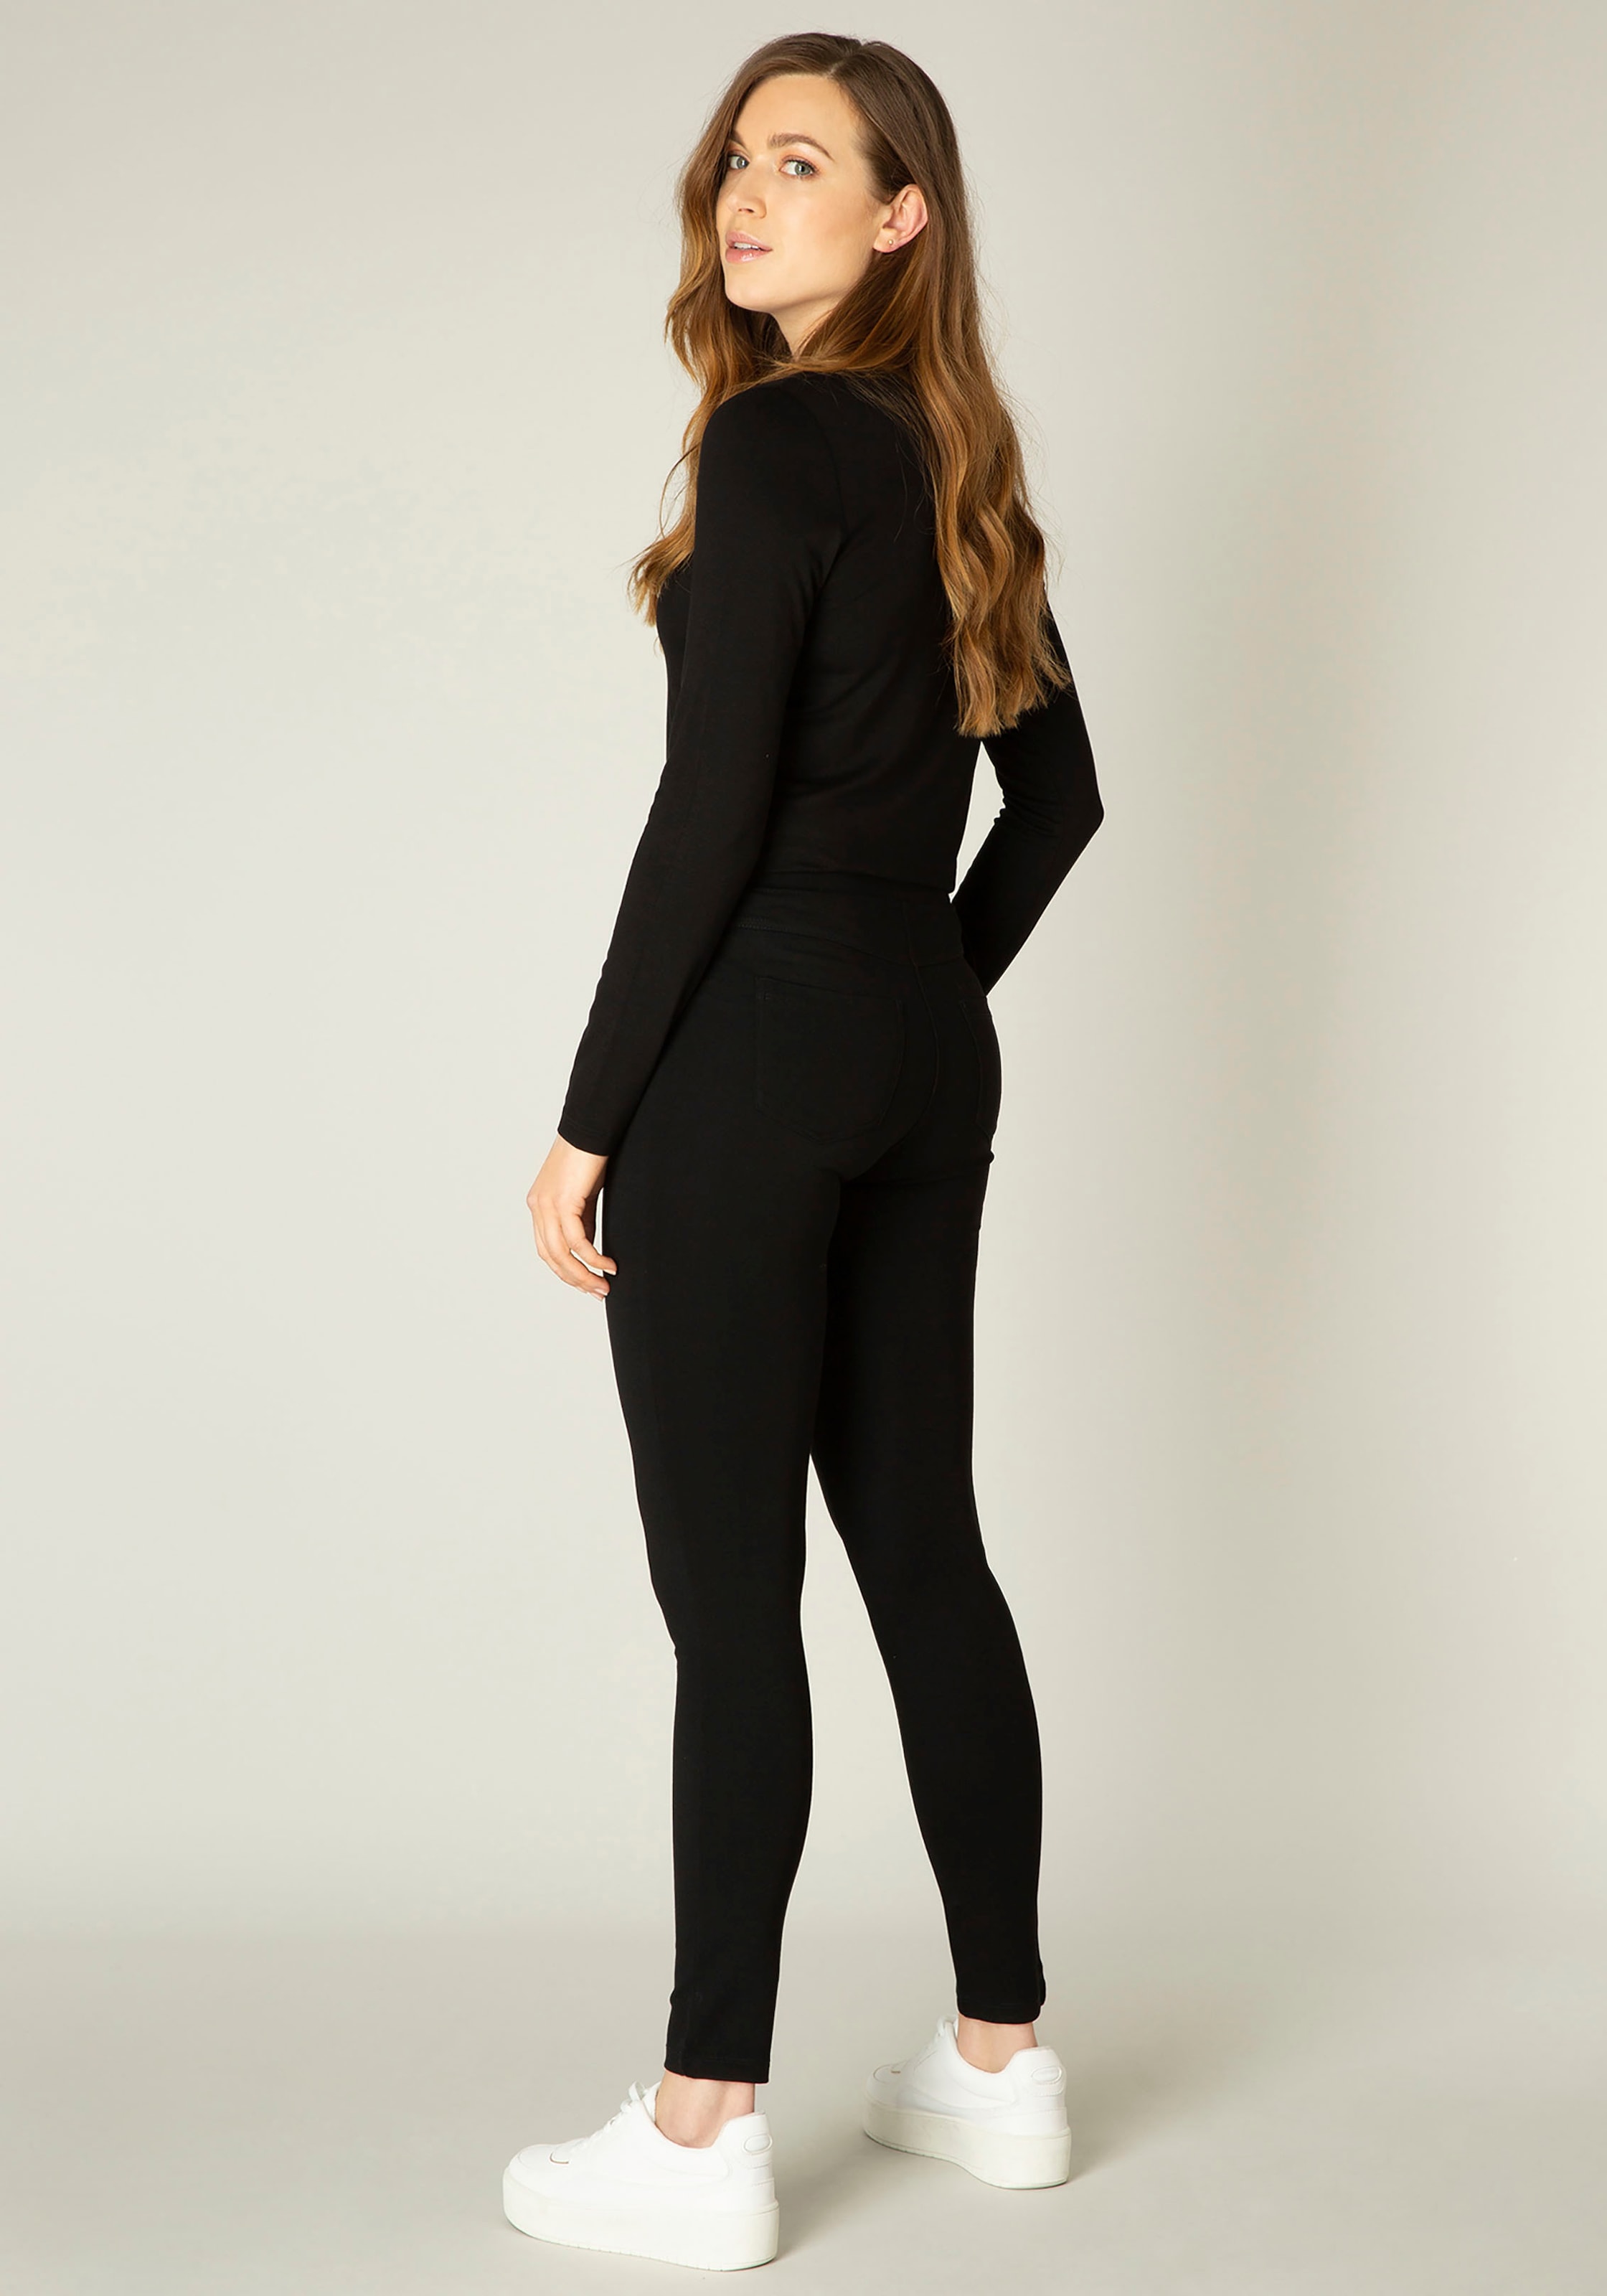 Bequemes Material »Ornika«, Level online Jeggings Skinny-Fit-Optik kaufen in Base